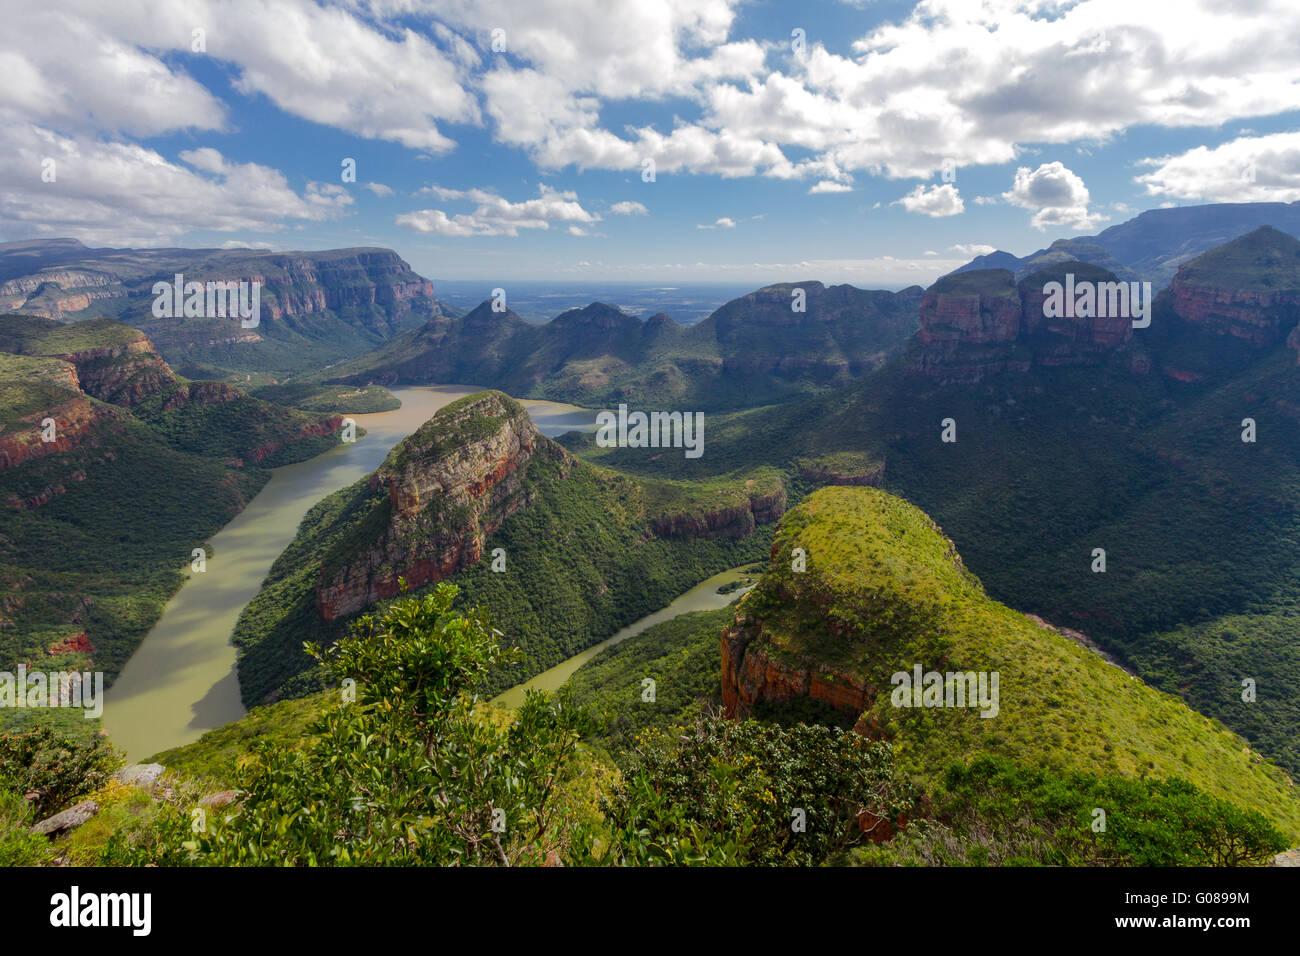 Under a beautifully patterned sky, the Three Rondavels rise up from the green floor and river of Blyde River Canyon, Mpumalanga, South Africa. Stock Photo